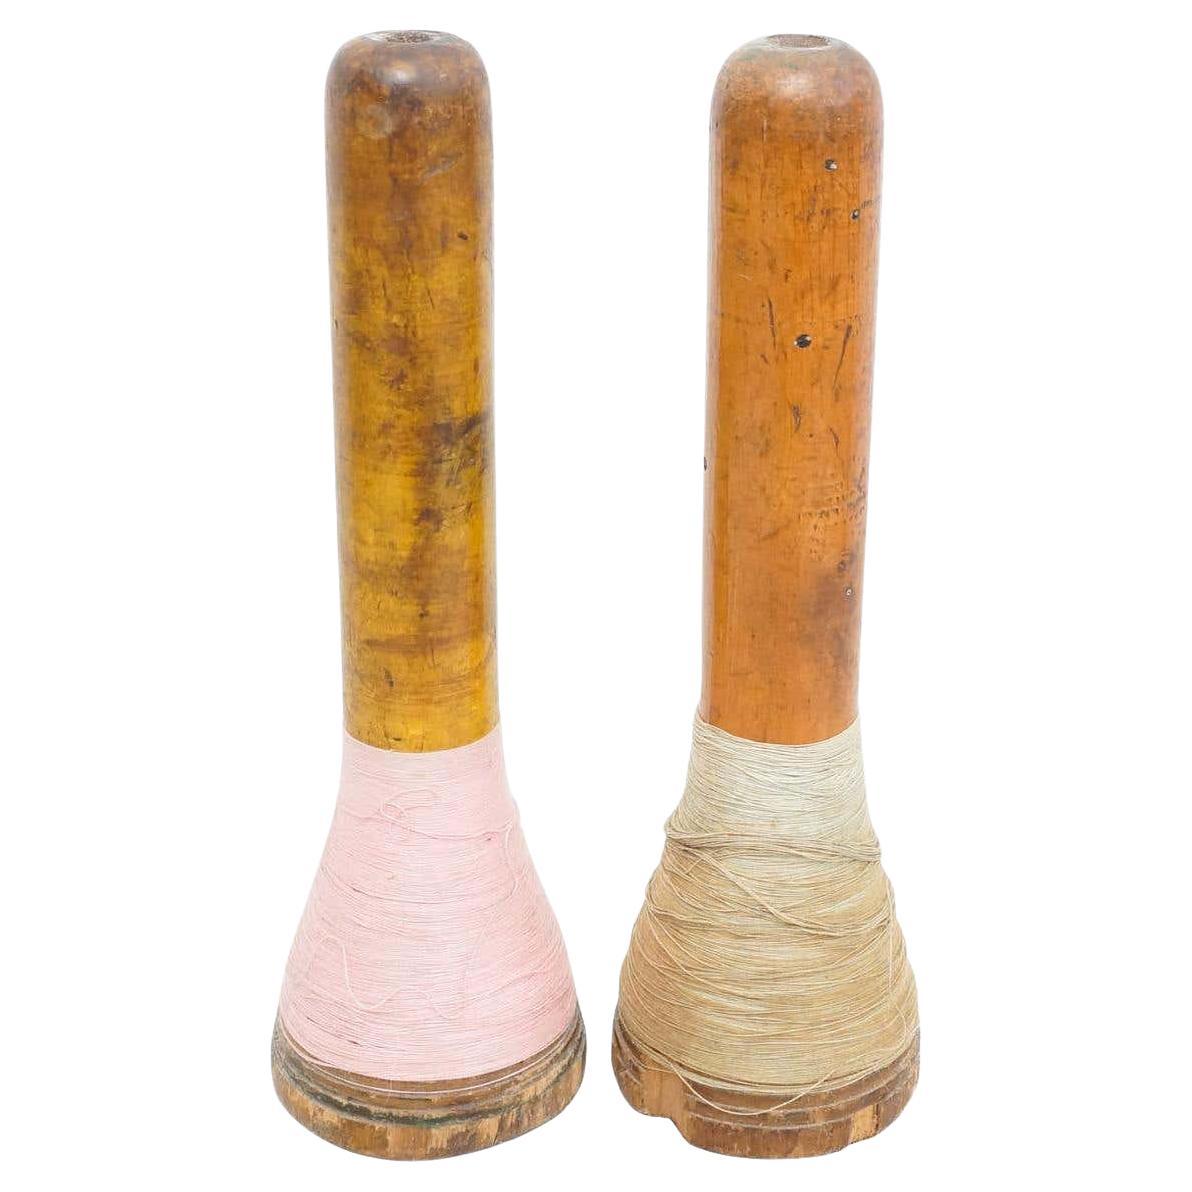 Set of Two Rustic Wooden Spools of Thread, circa 1930 For Sale